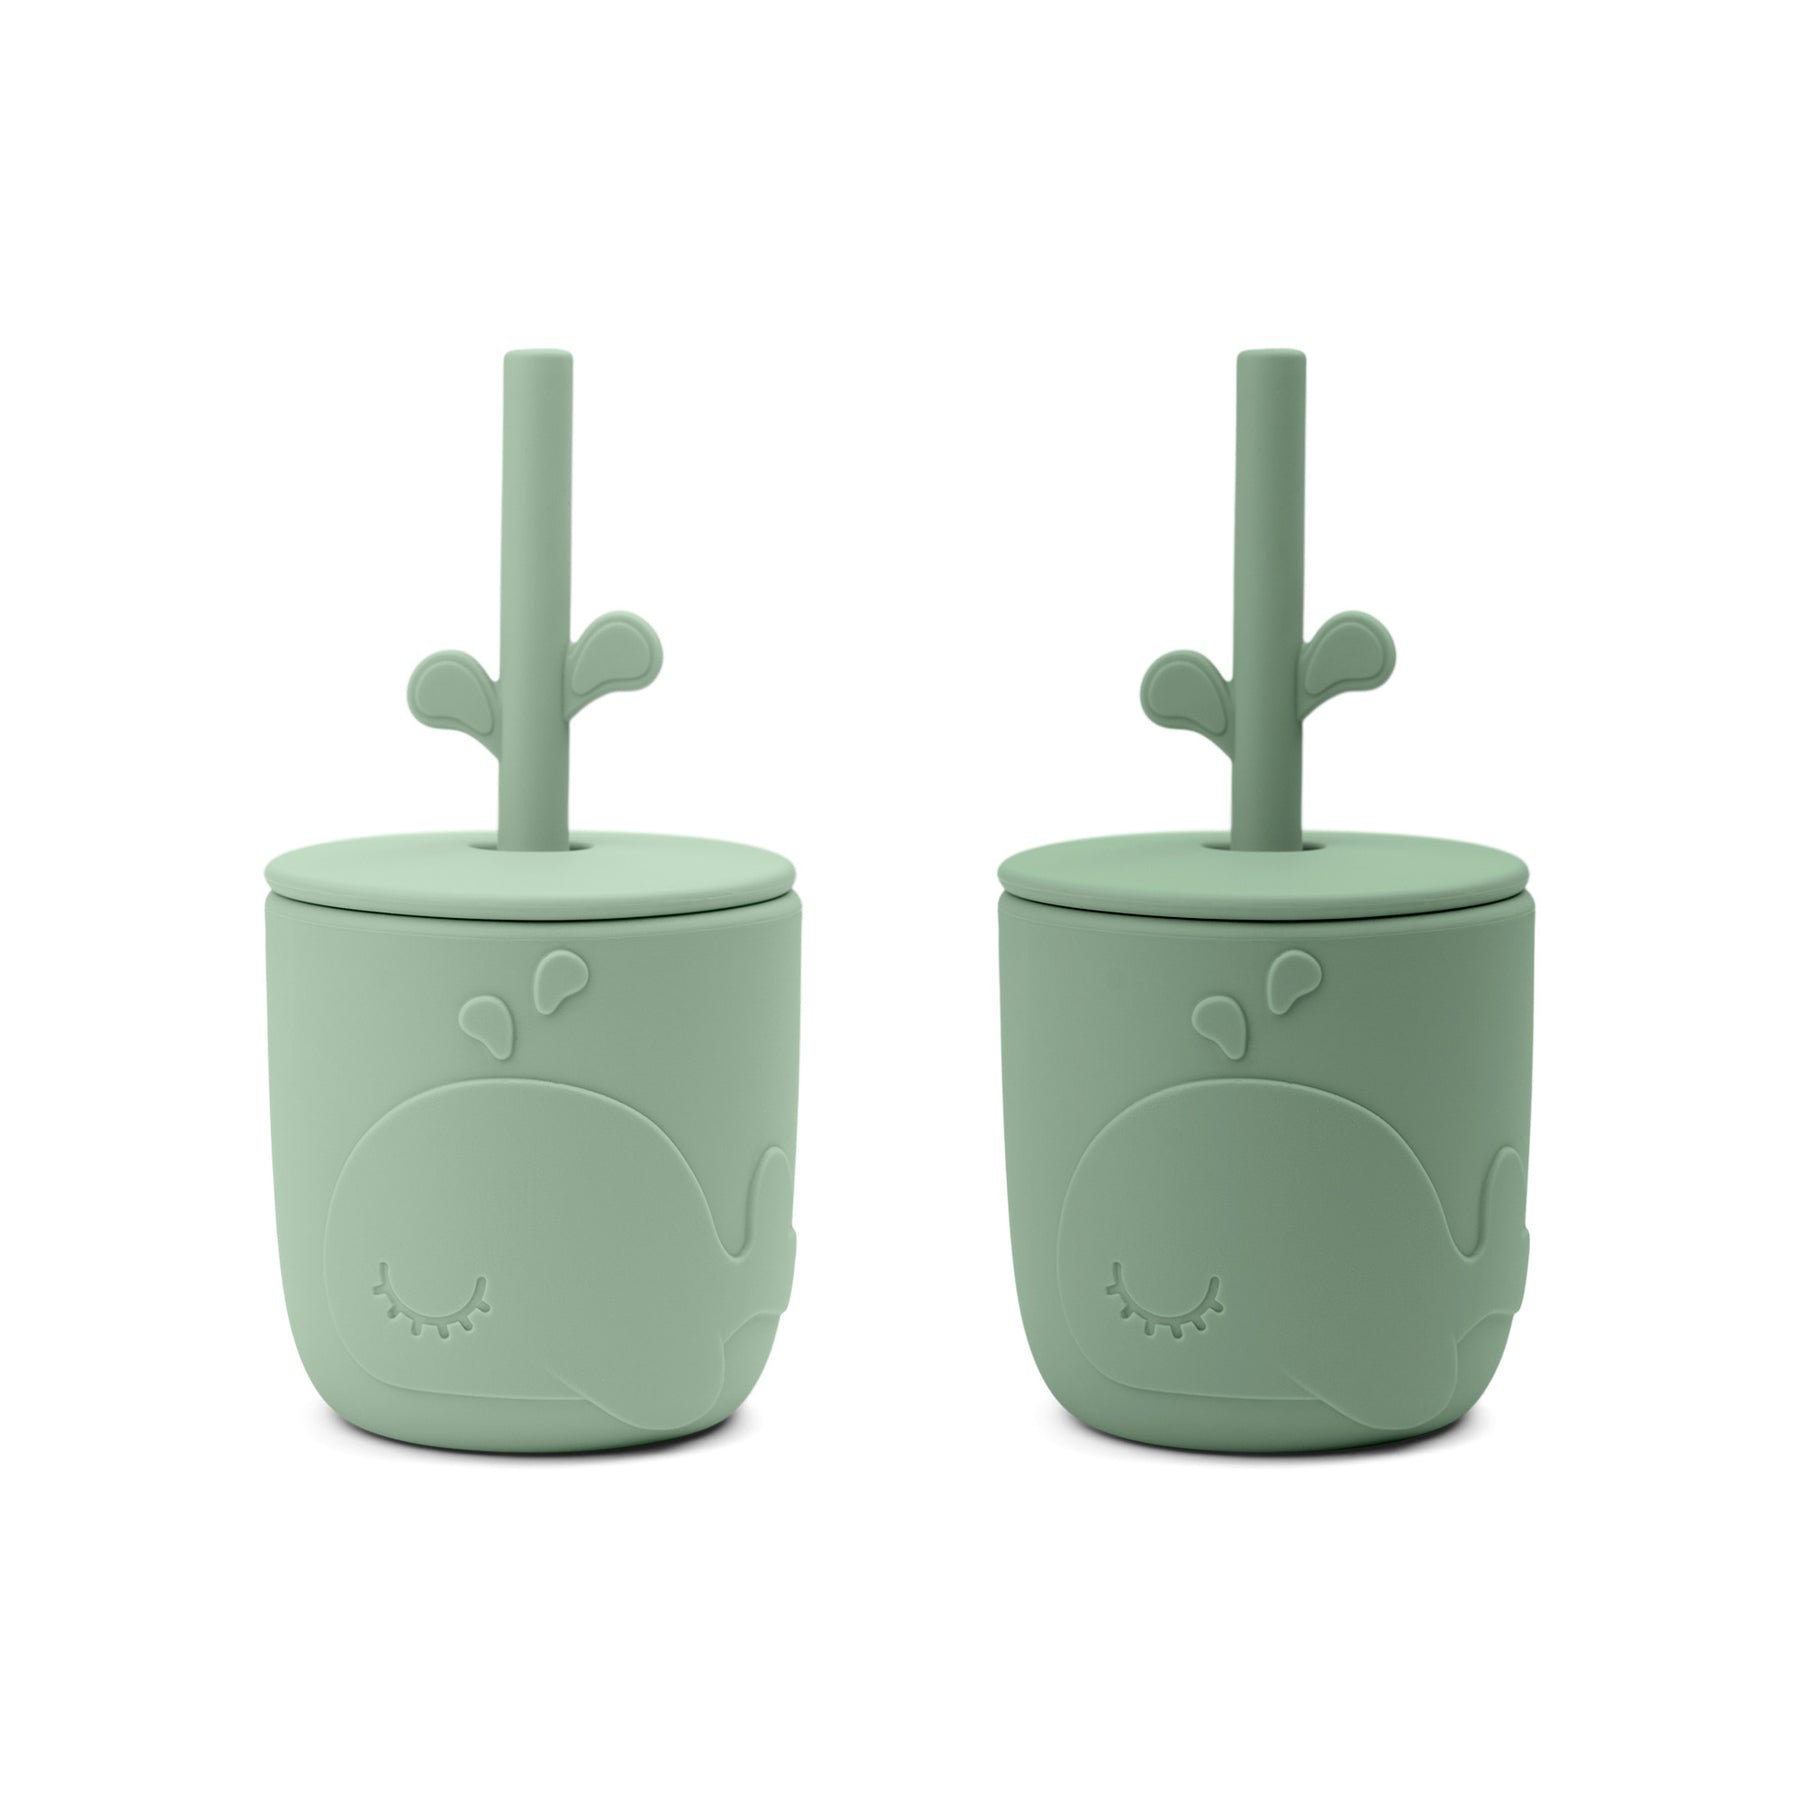 Peekaboo straw cup 2-pack - Wally - Green - Front